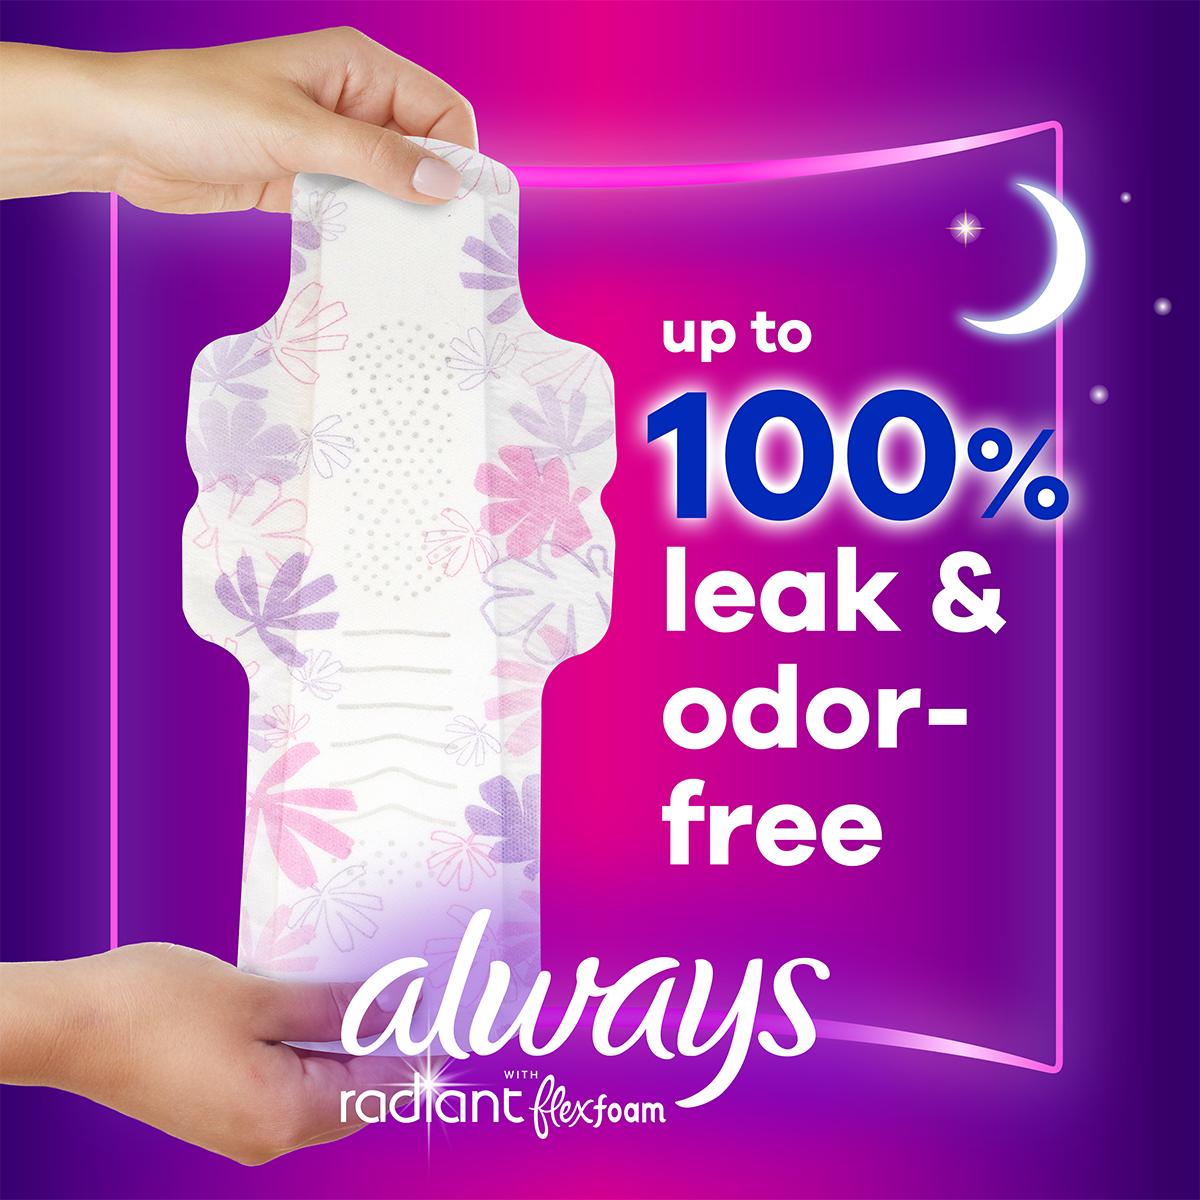 Radiant Pads: Size 5 Extra Heavy Overnight Flow With Wings Scented